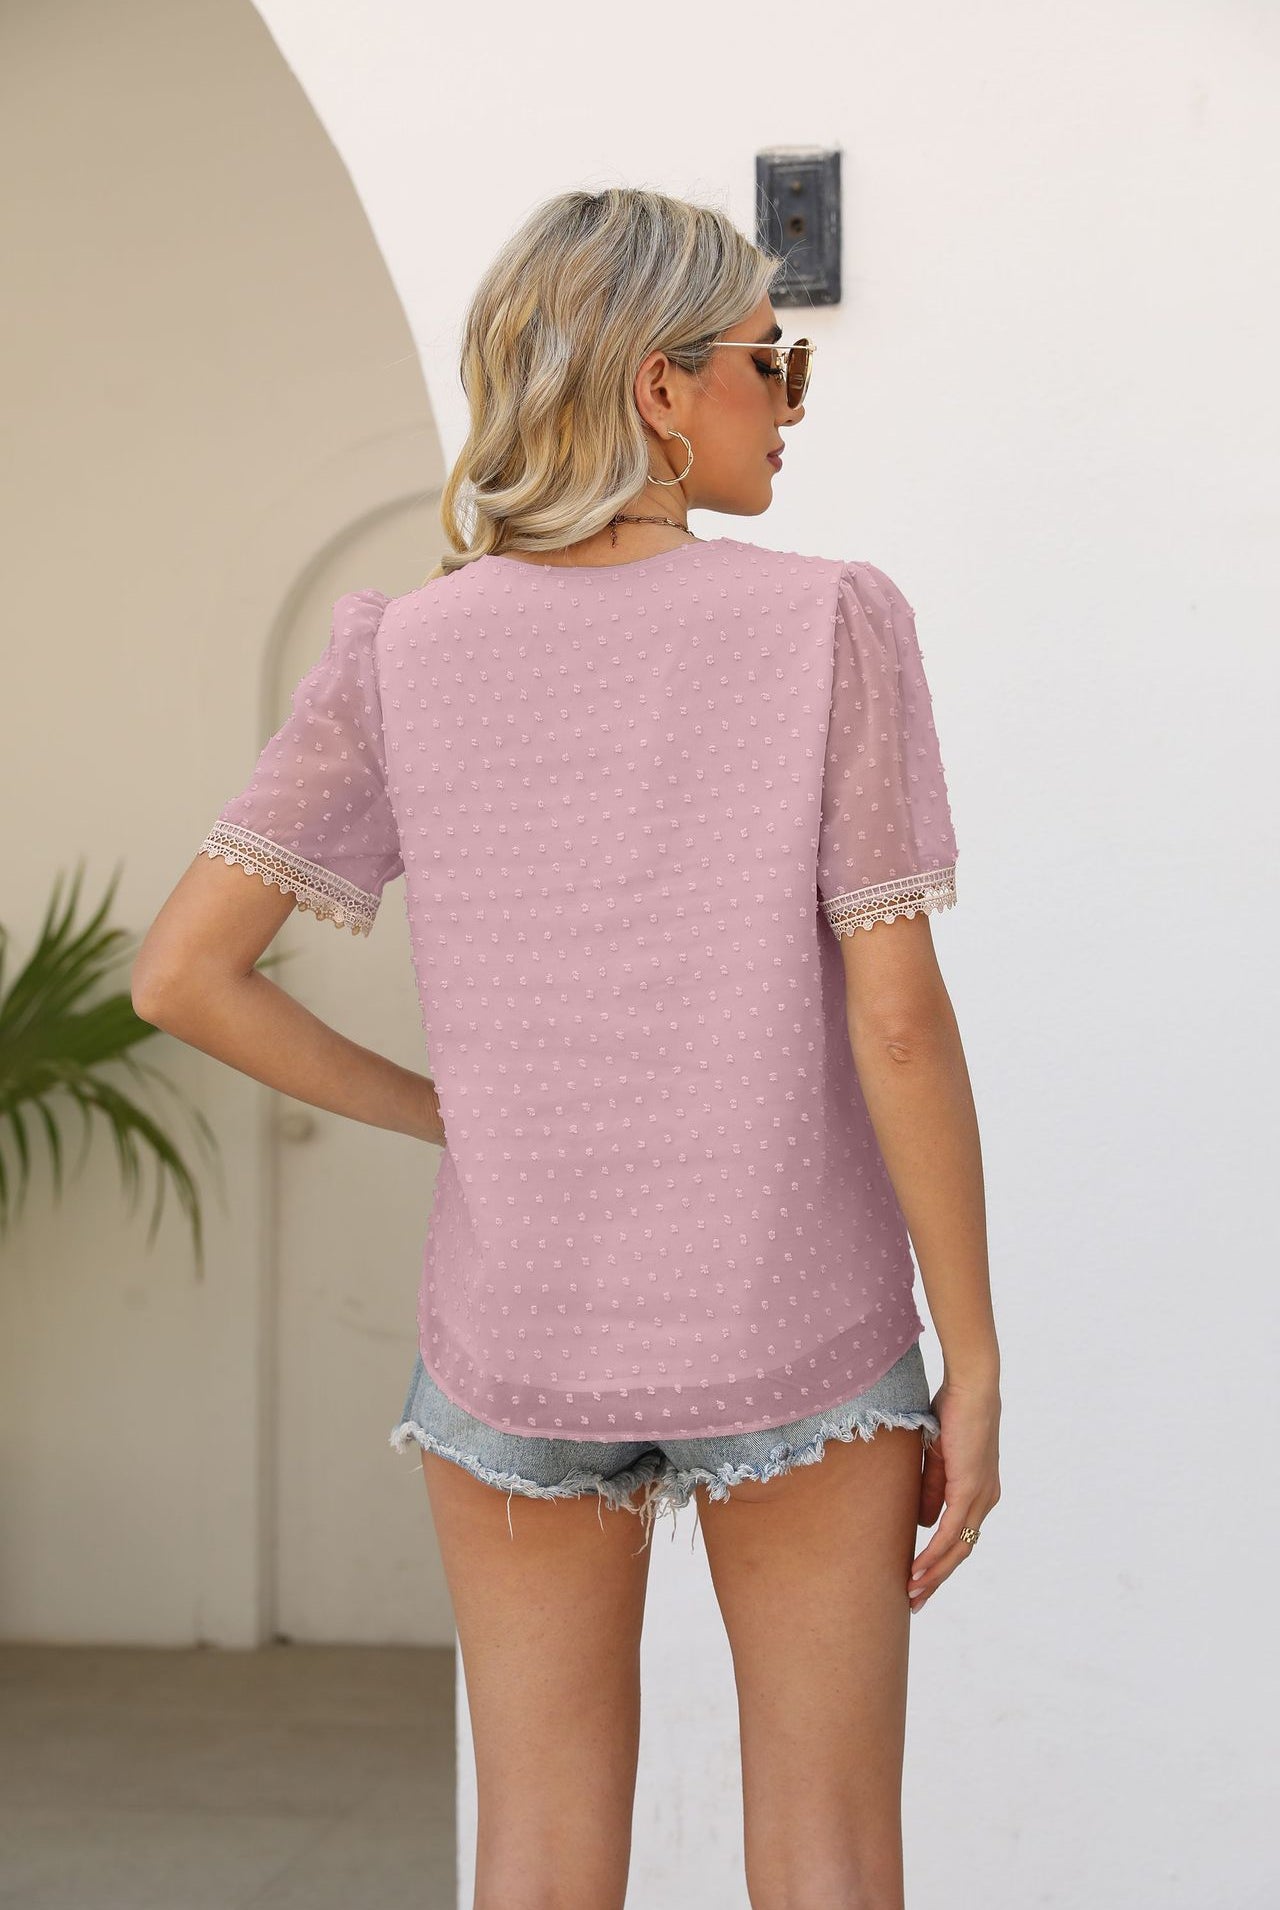 Gray Contrast V-Neck Swiss Dot Top Clothing